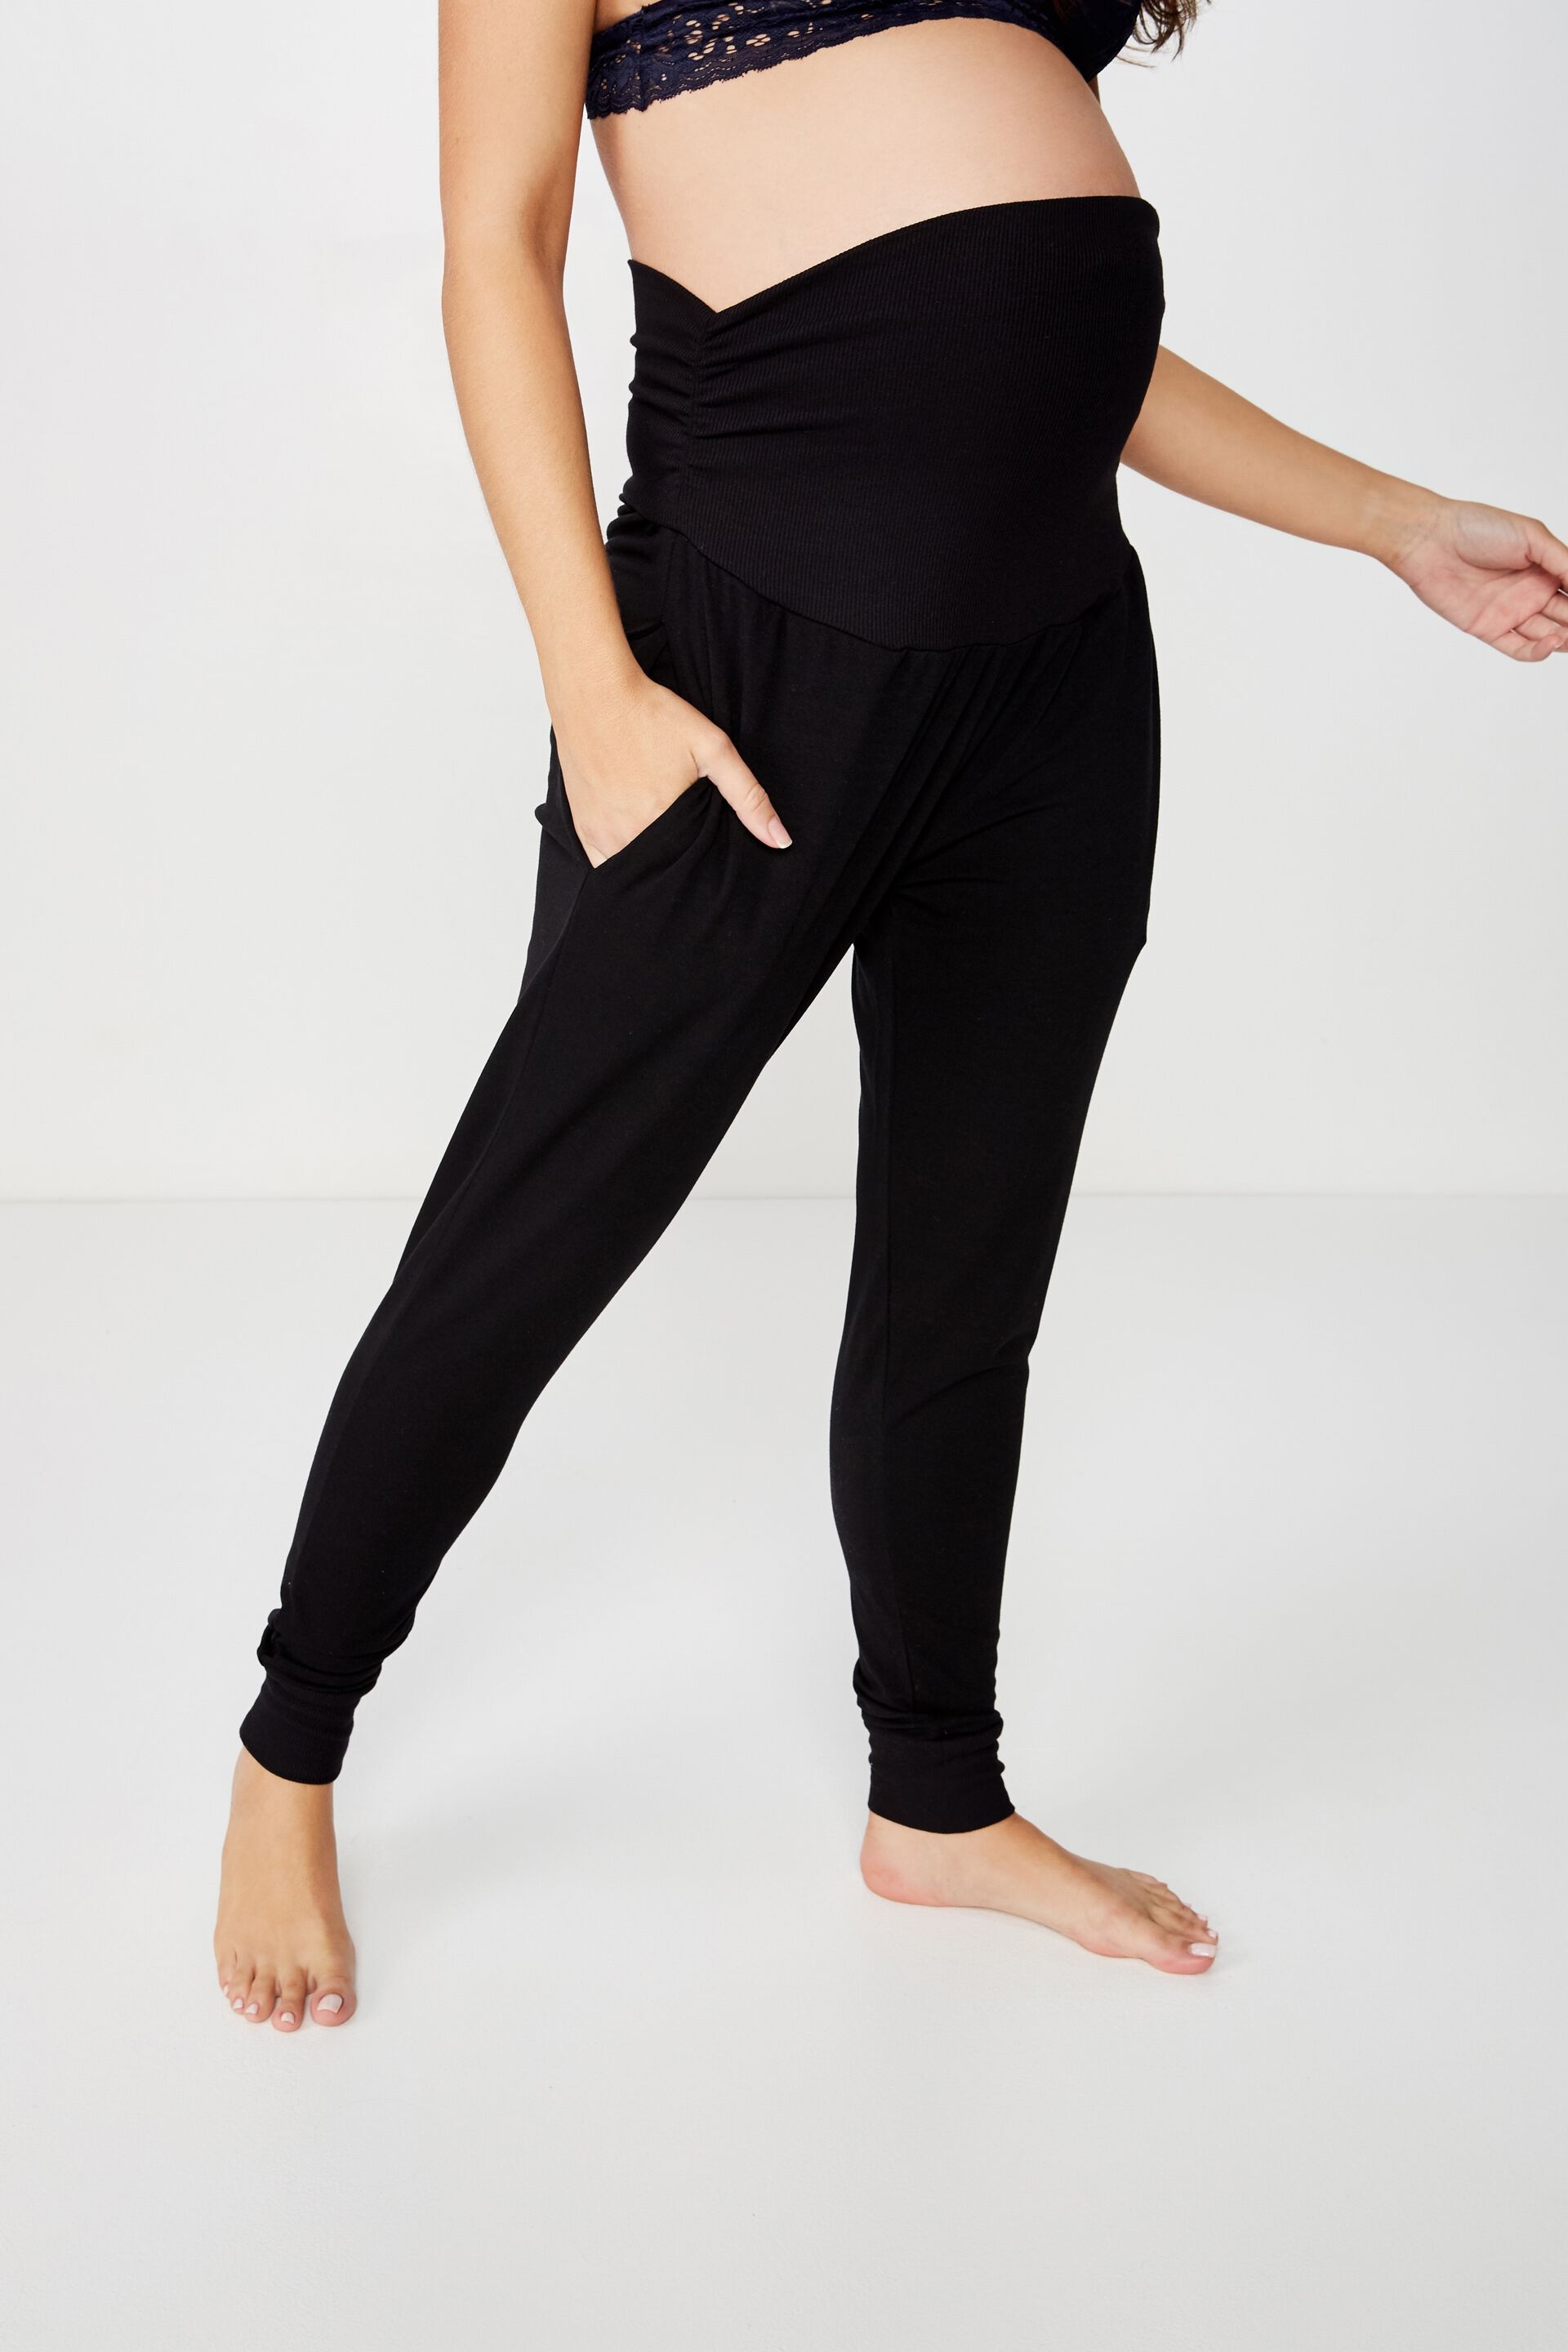 Work That Baby Out: Maternity Active Wear – Ella Bella